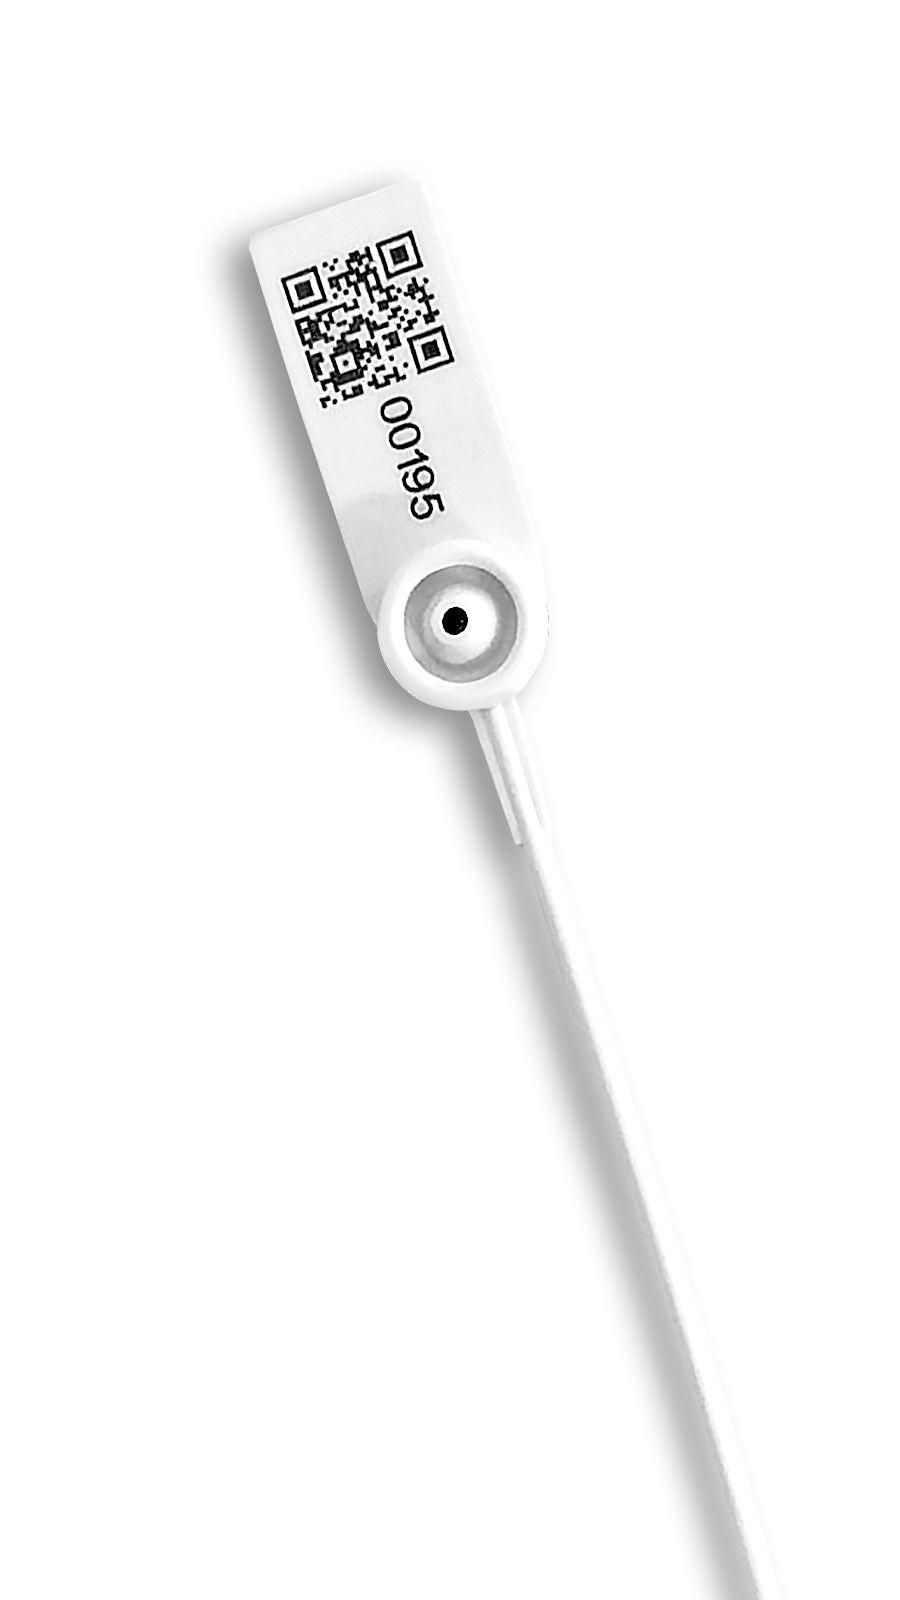 Plastic clamp seal with a unique code - white